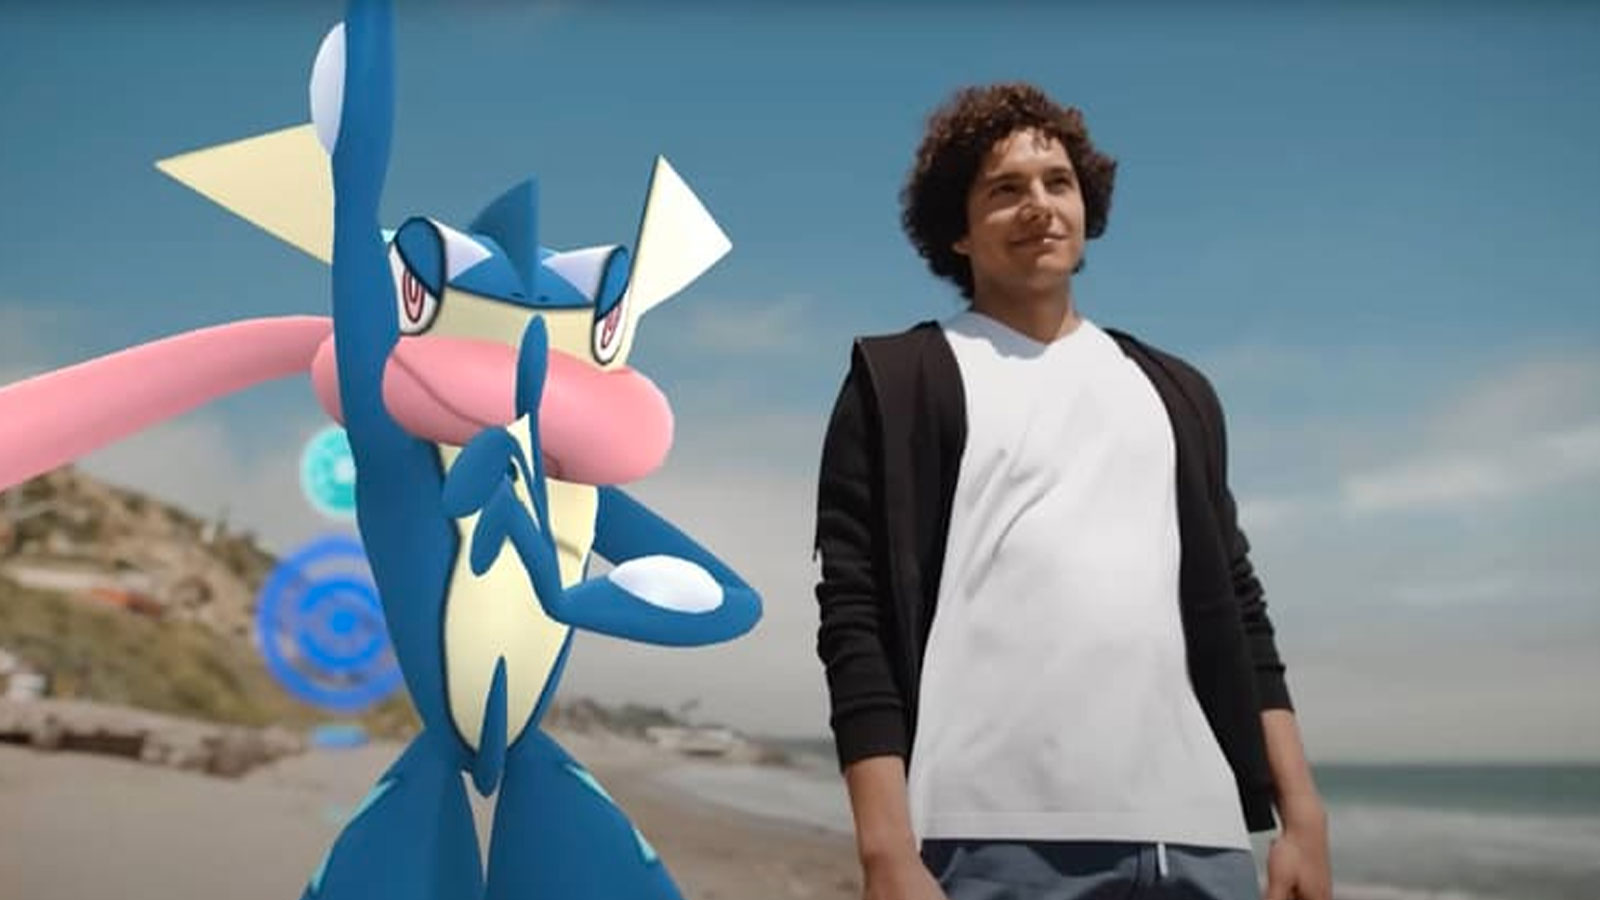 Attractive new graphics are being introduced to Pokémon Go